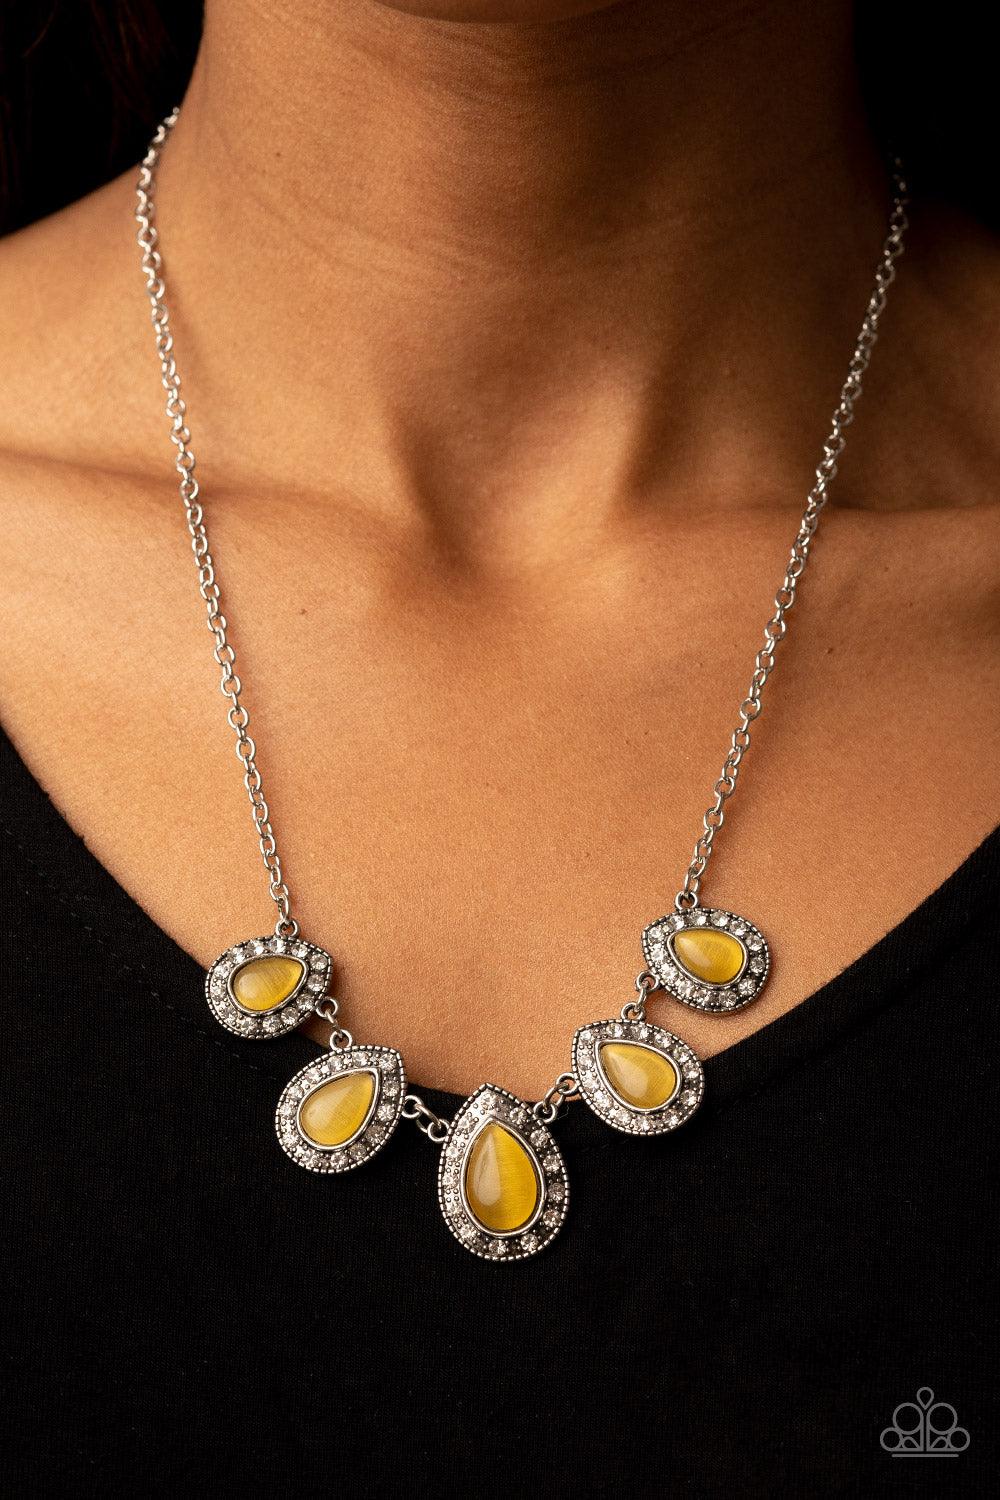 Everlasting Enchantment Yellow Necklace - Jewelry by Bretta